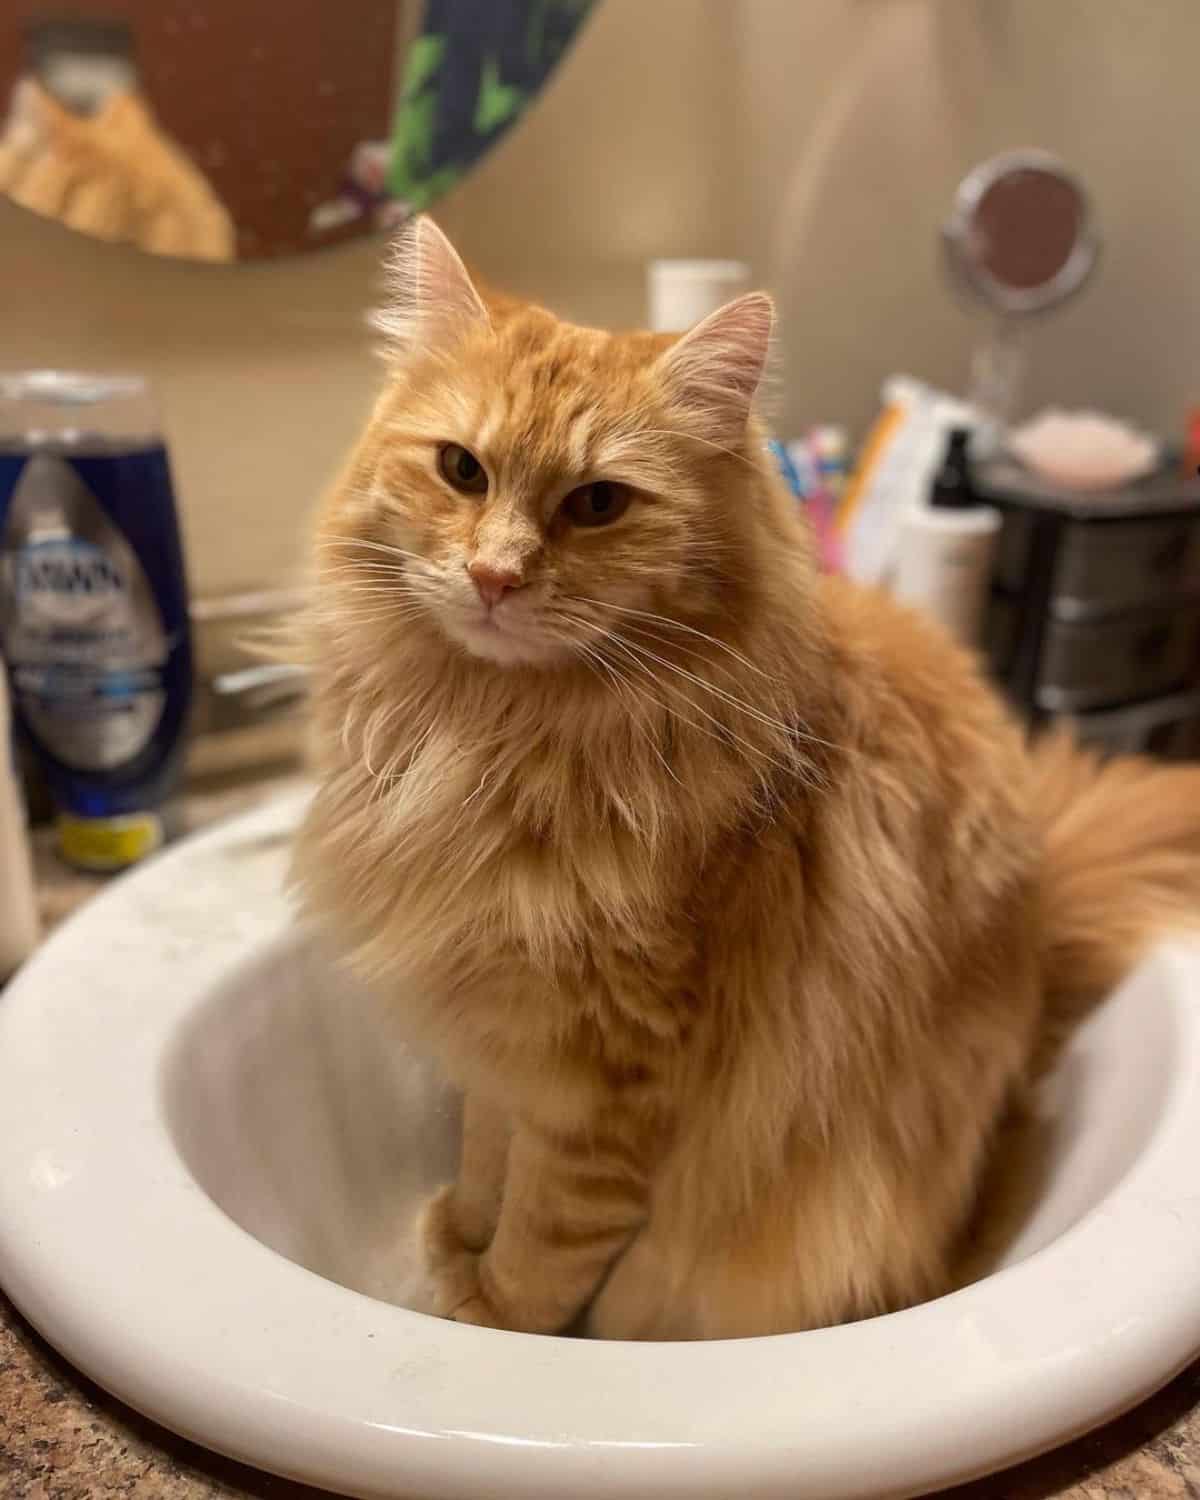 An adorable ginger maine coon sitting in a porcelain sink.